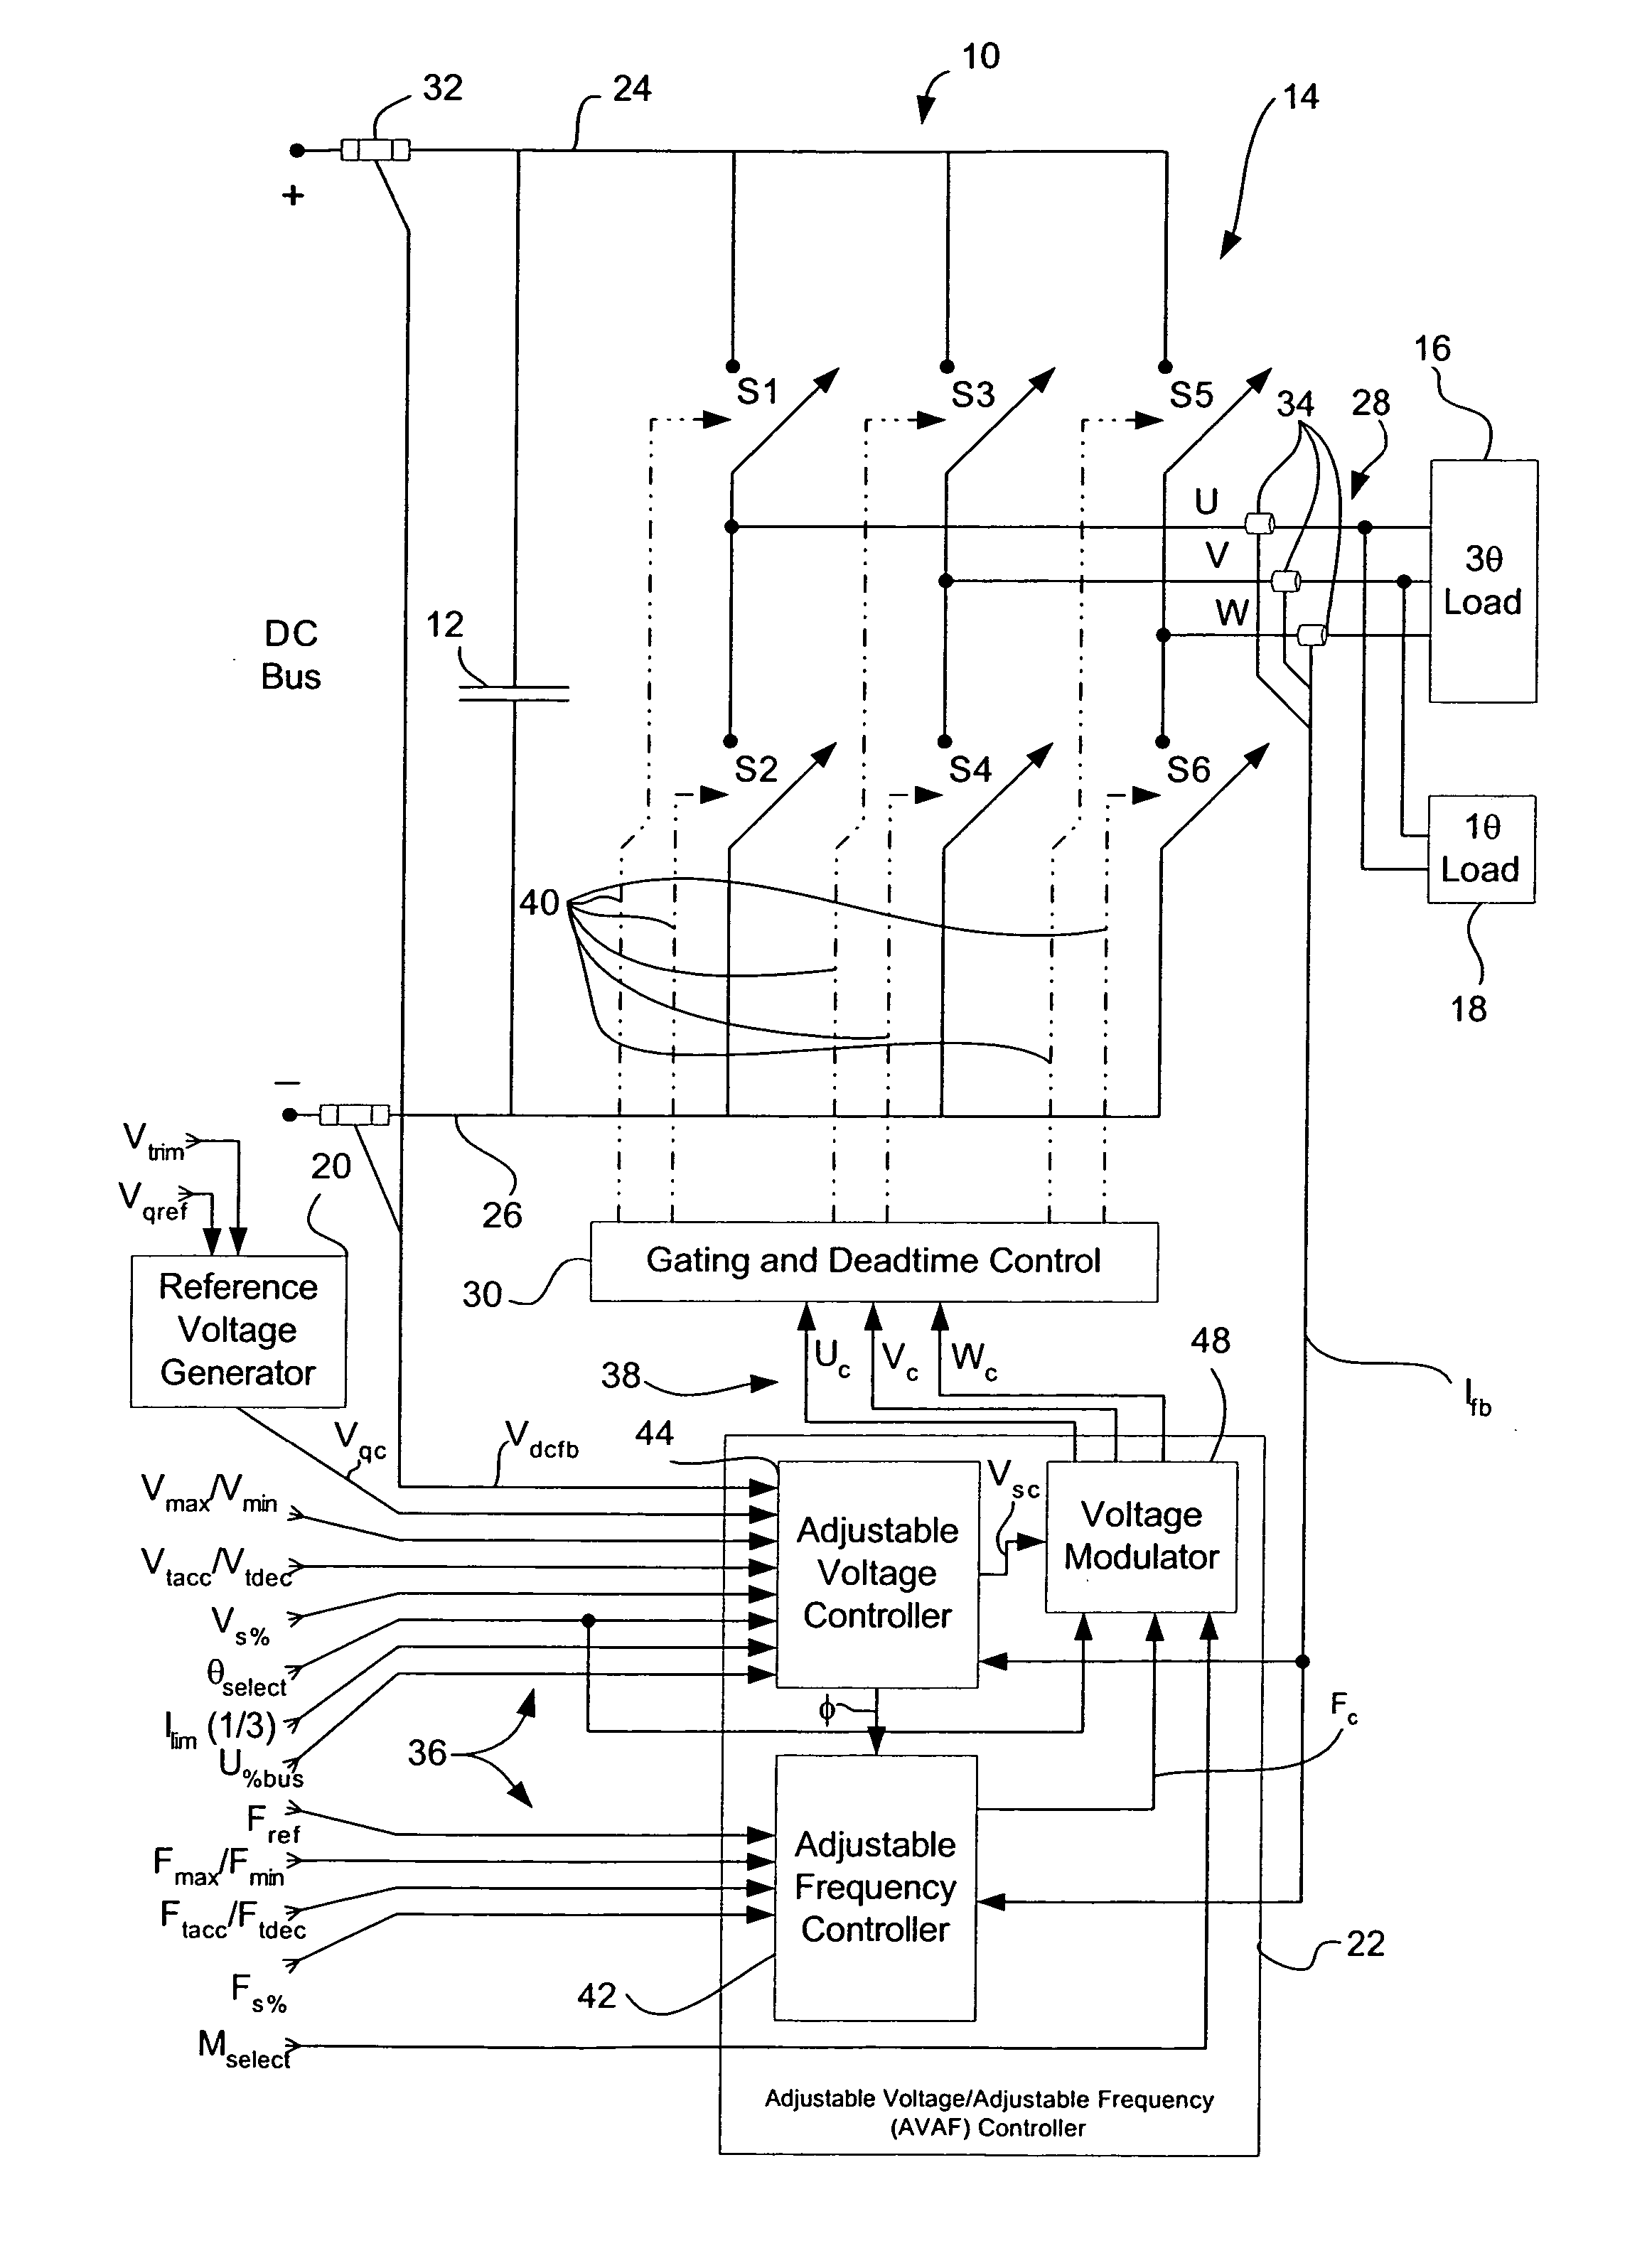 Method and apparatus for adjustable voltage/adjustable frequency inverter control